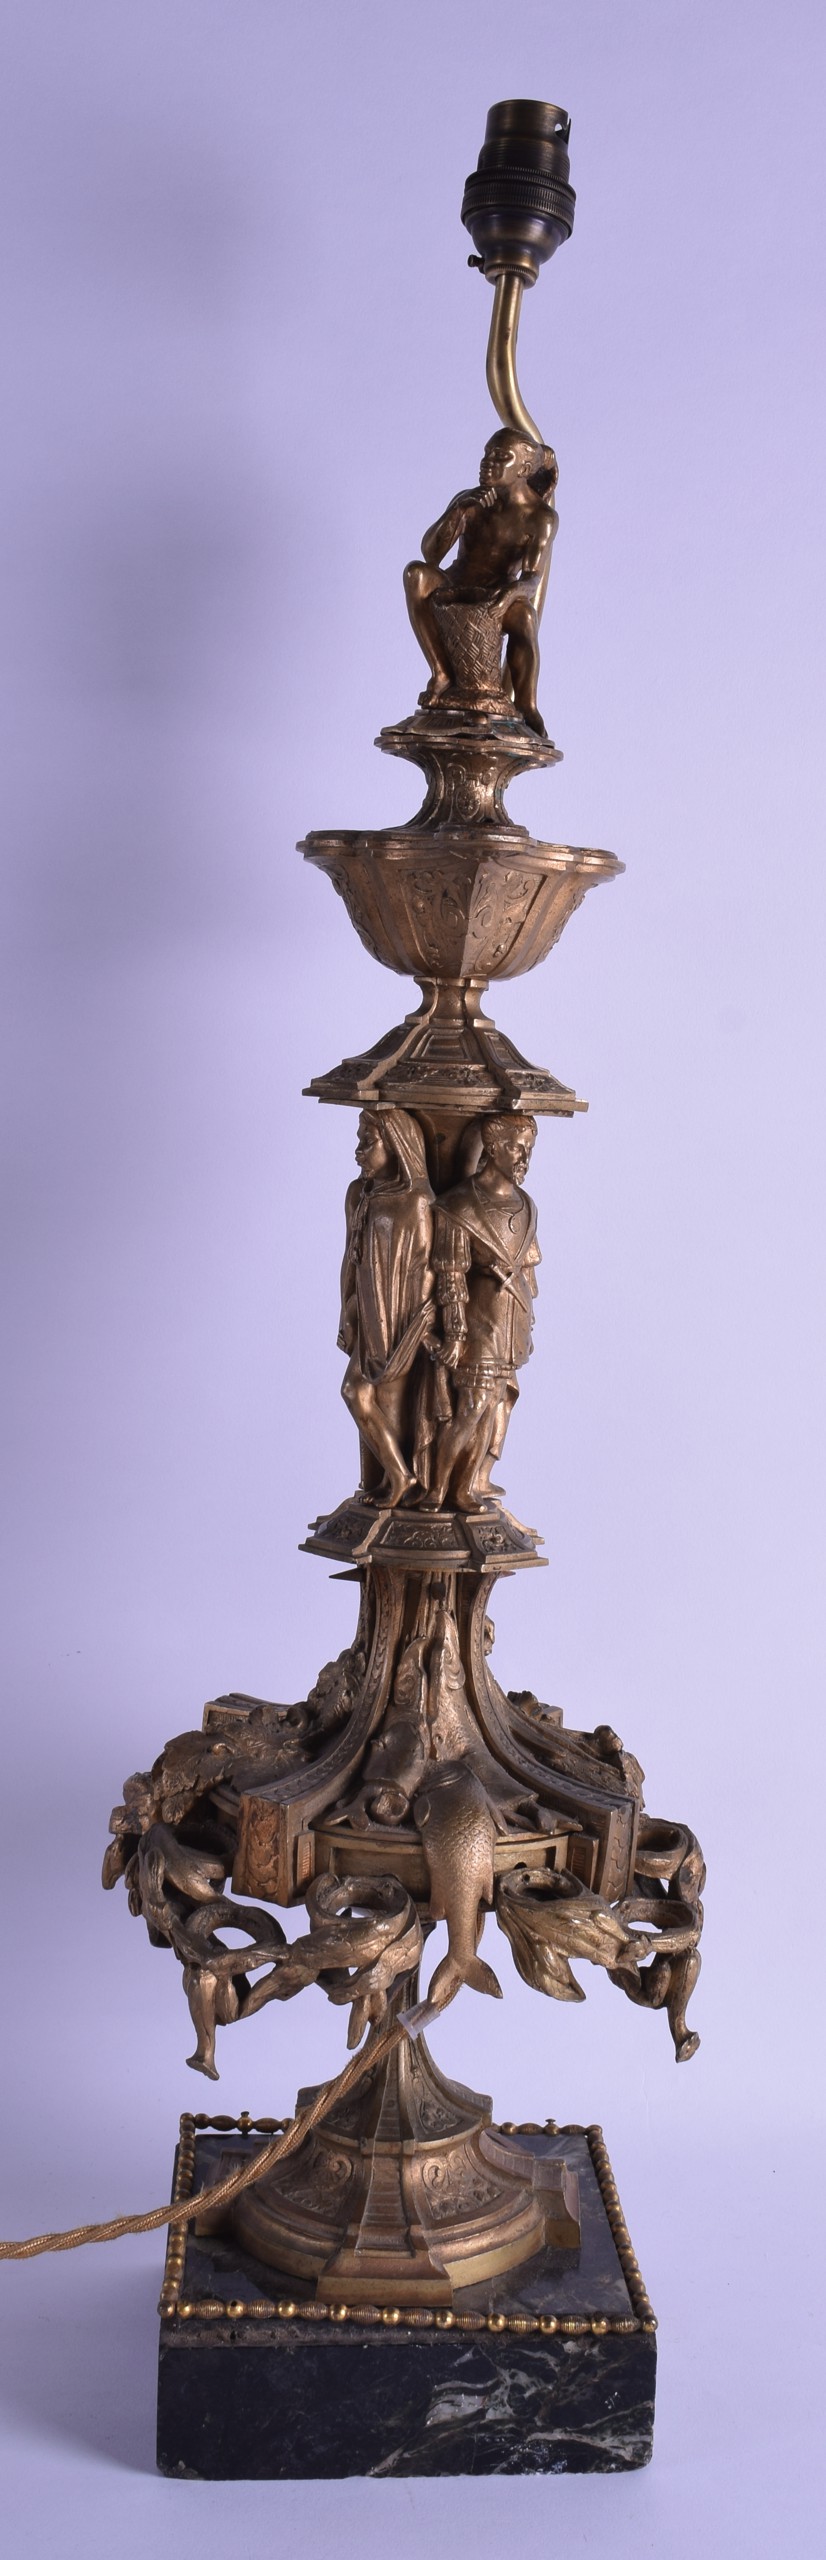 A GOOD 19TH CENTURY FRENCH ORMOLU TABLE LAMP decorated with classical figures in various pursuits.